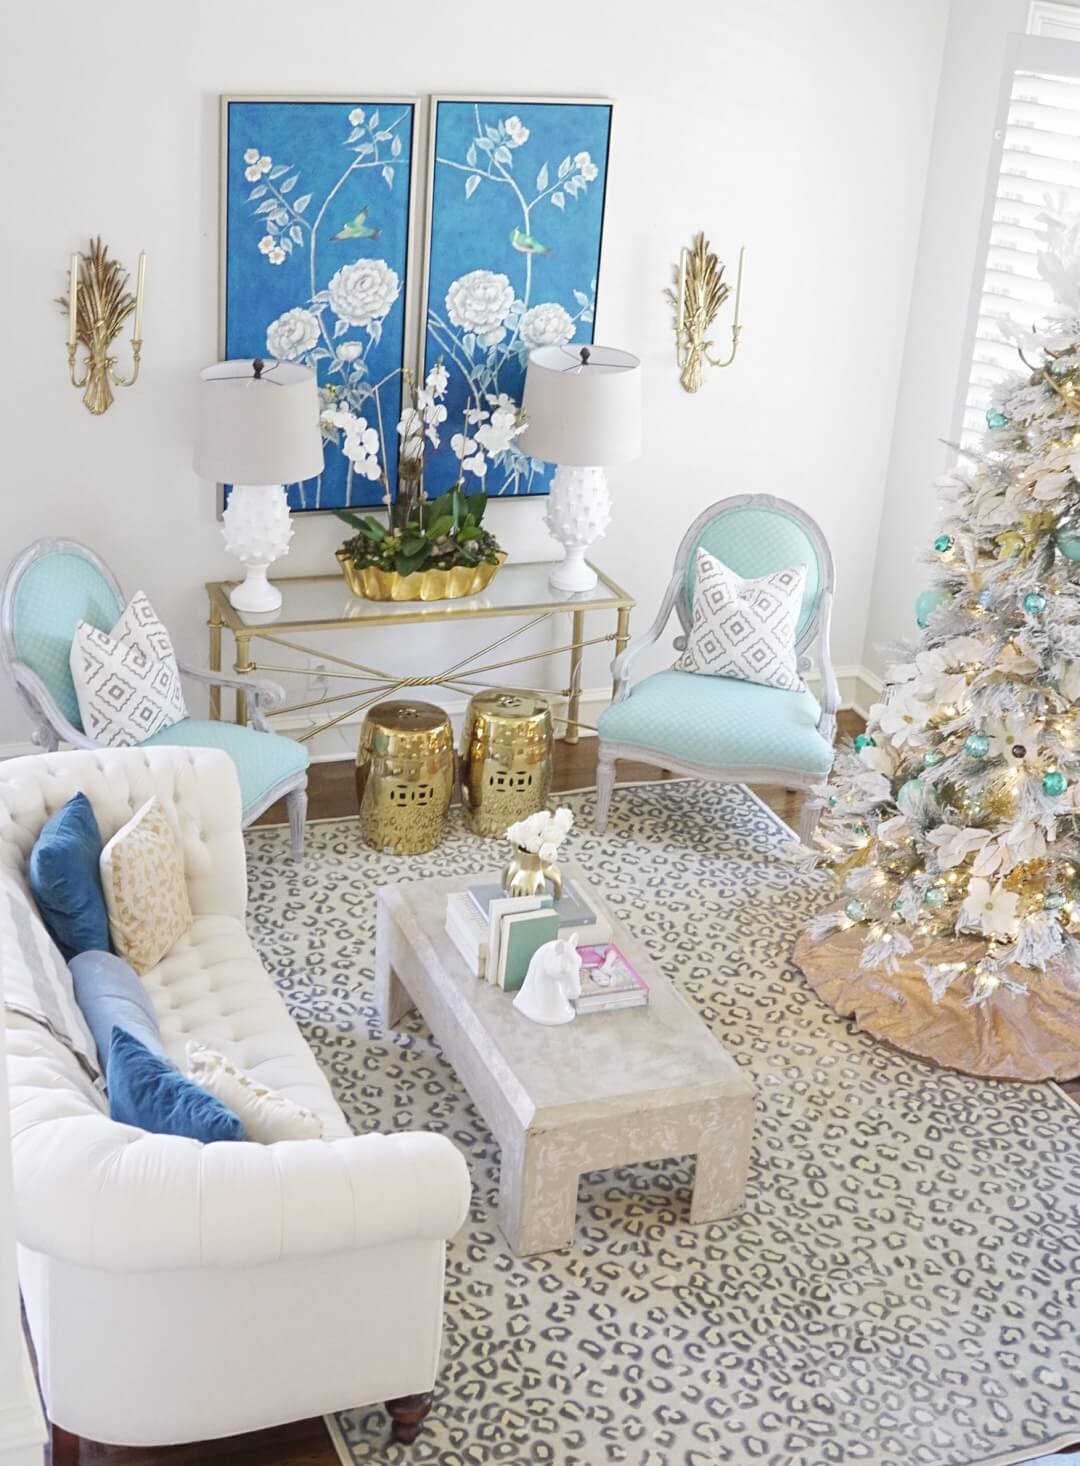 Holiday Home Tour | Style Your Senses Dallas Home